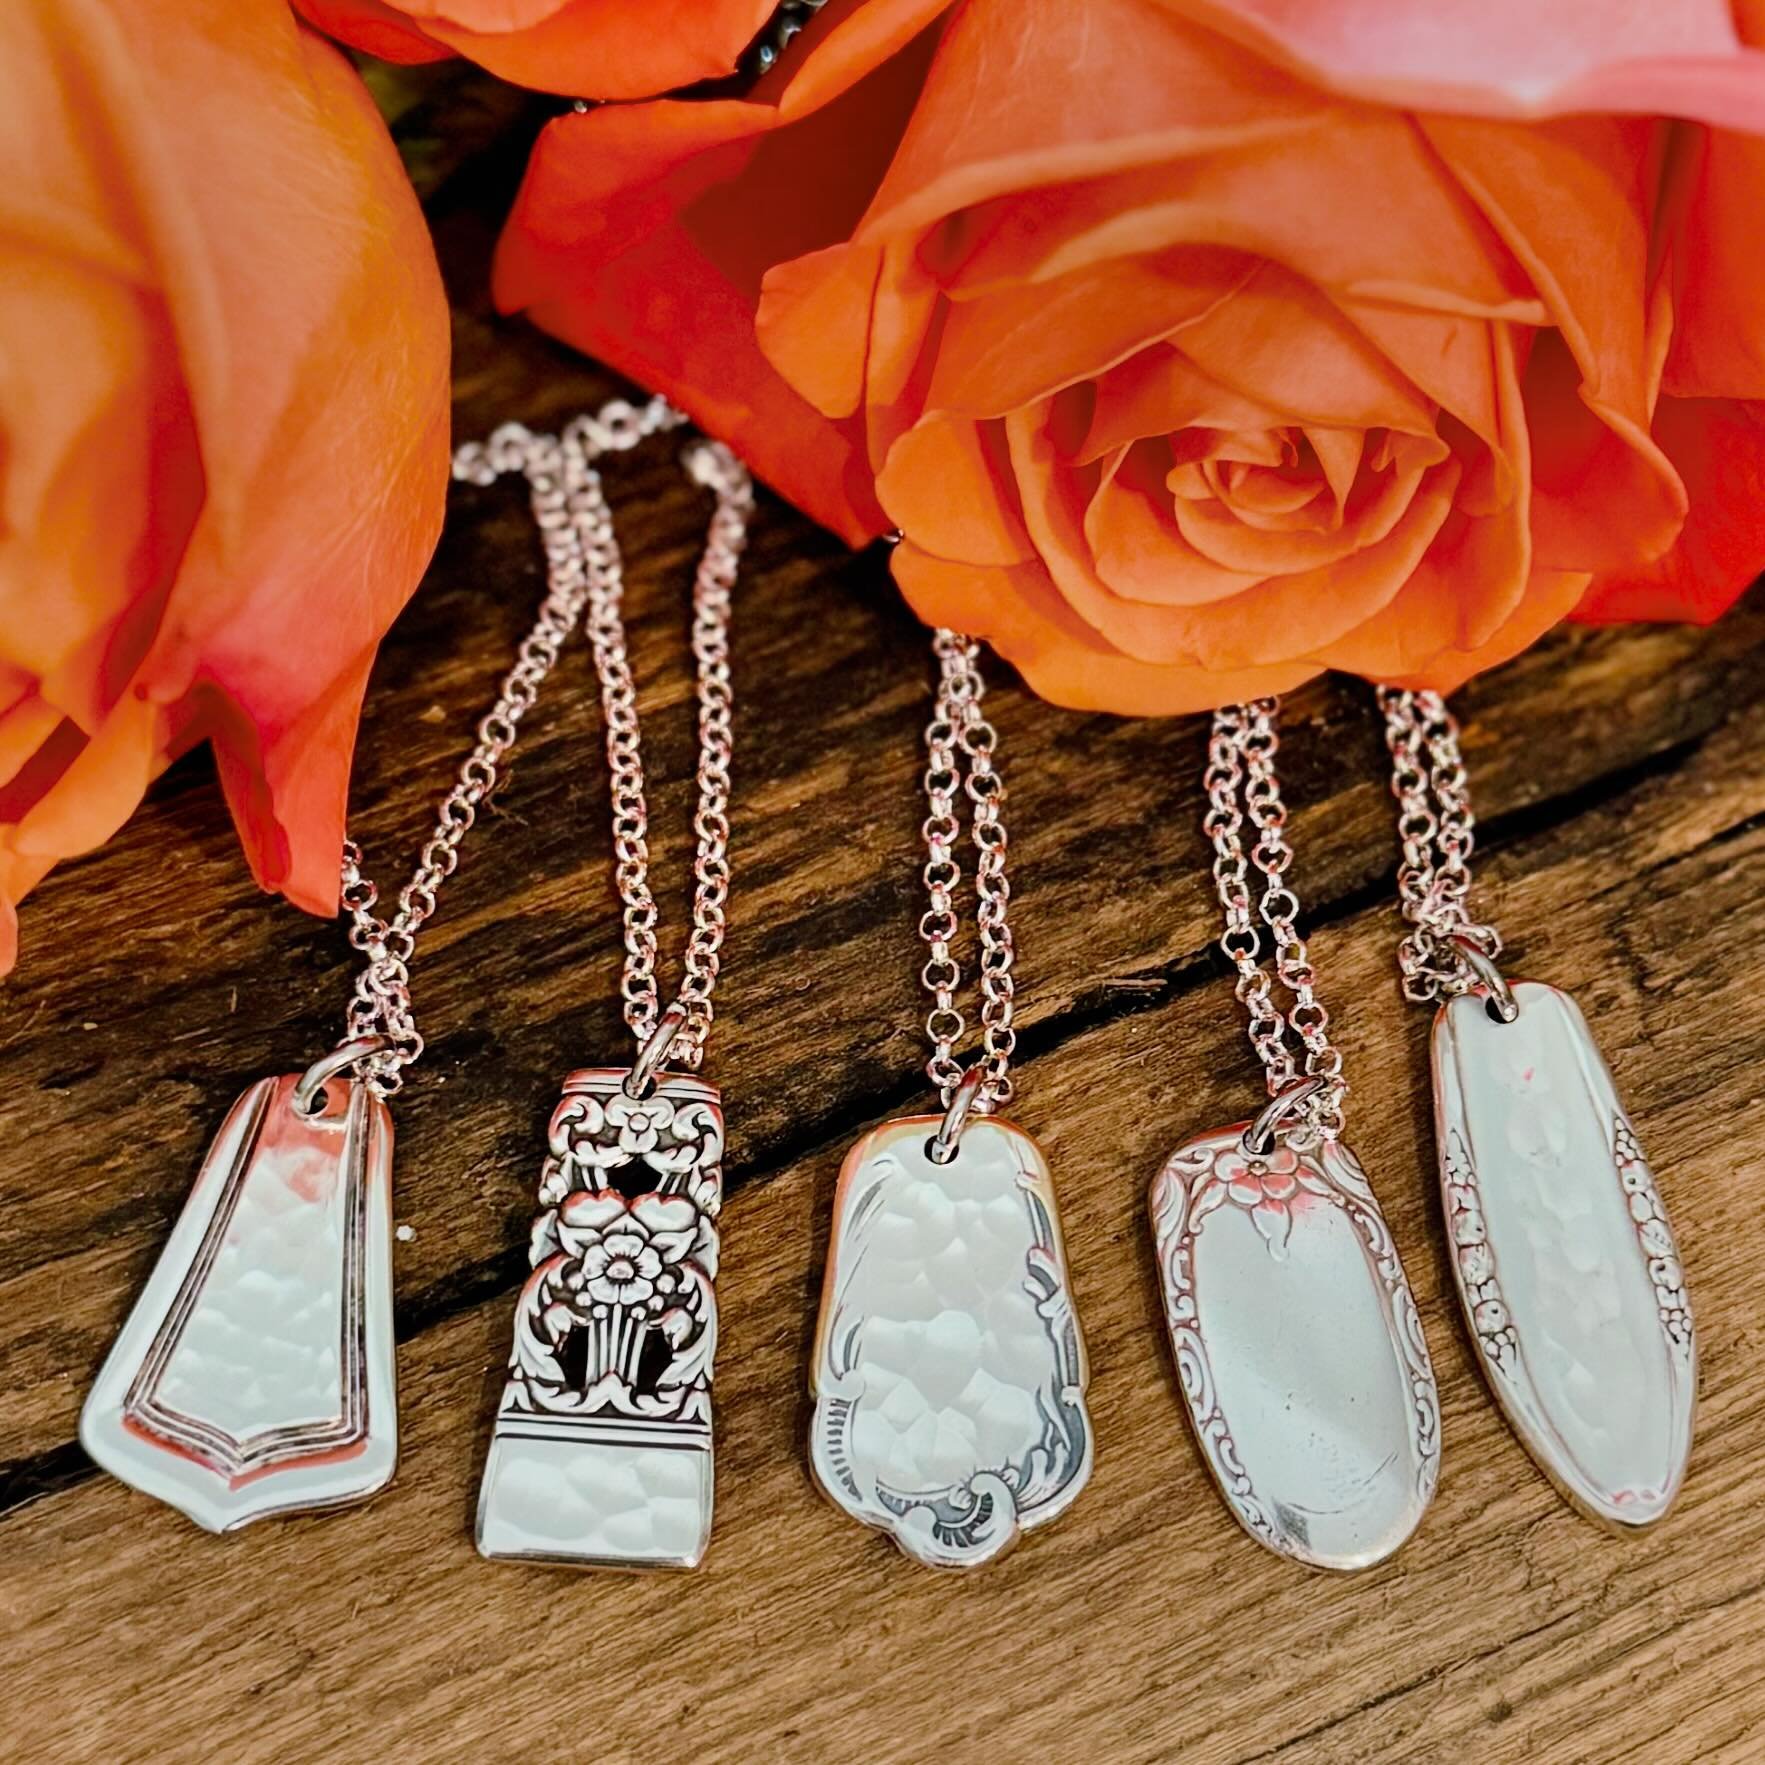 The ends of the vintage silverware handles make the sweetest necklaces&hellip;.

And even more special if it&rsquo;s from your heirloom silverware!

#silverwearbymisty
#sustainablefashion 
#heirloom
#necklacesoftheday